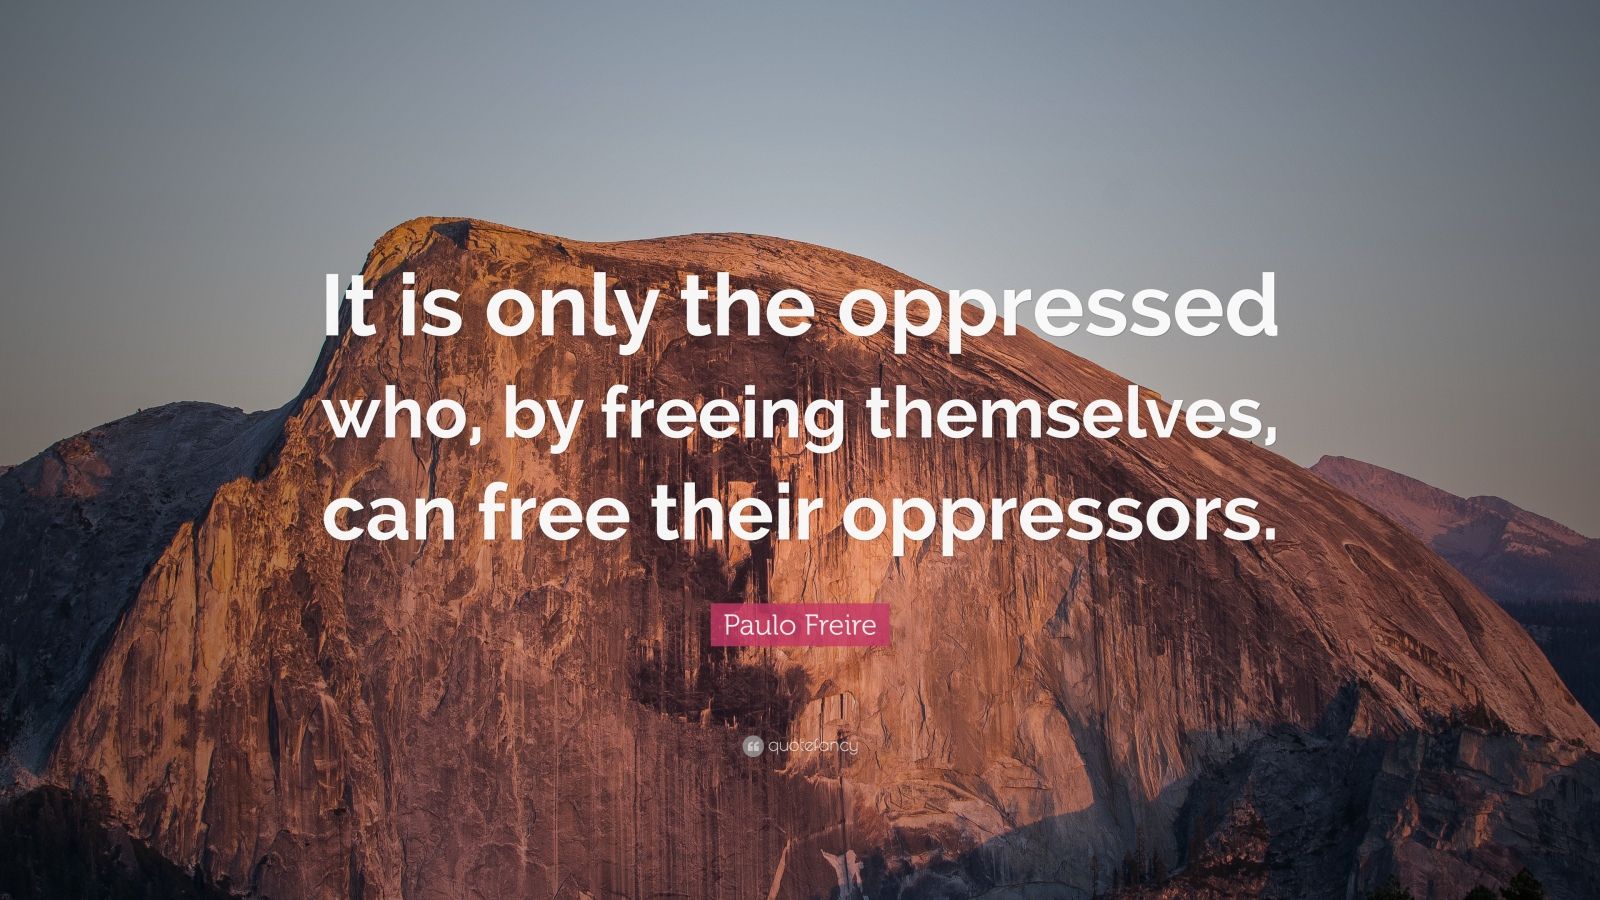 Paulo Freire Quote: “It is only the oppressed who, by freeing ...